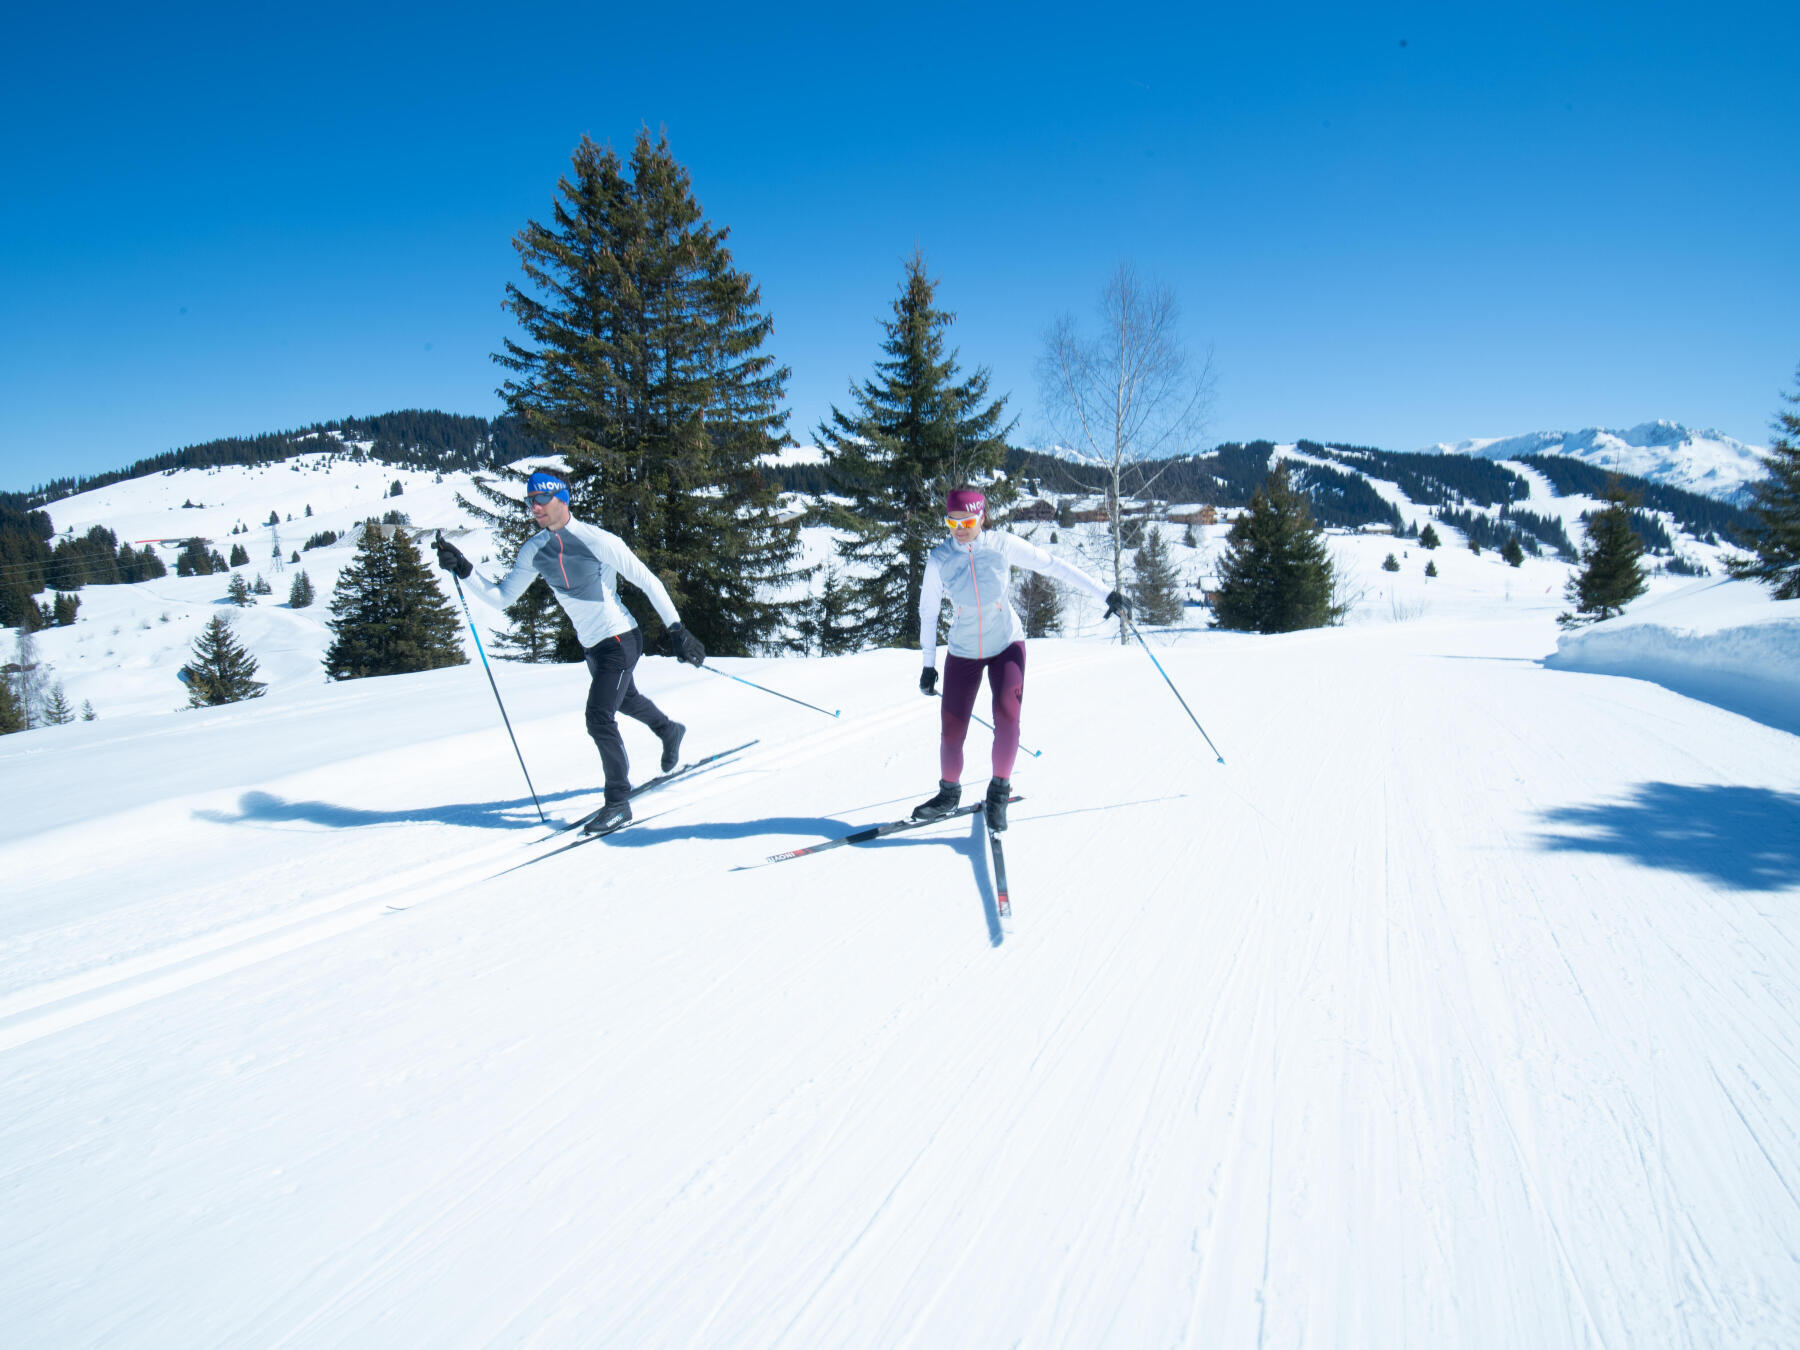 Ski touring, an ideal activity for the whole family!